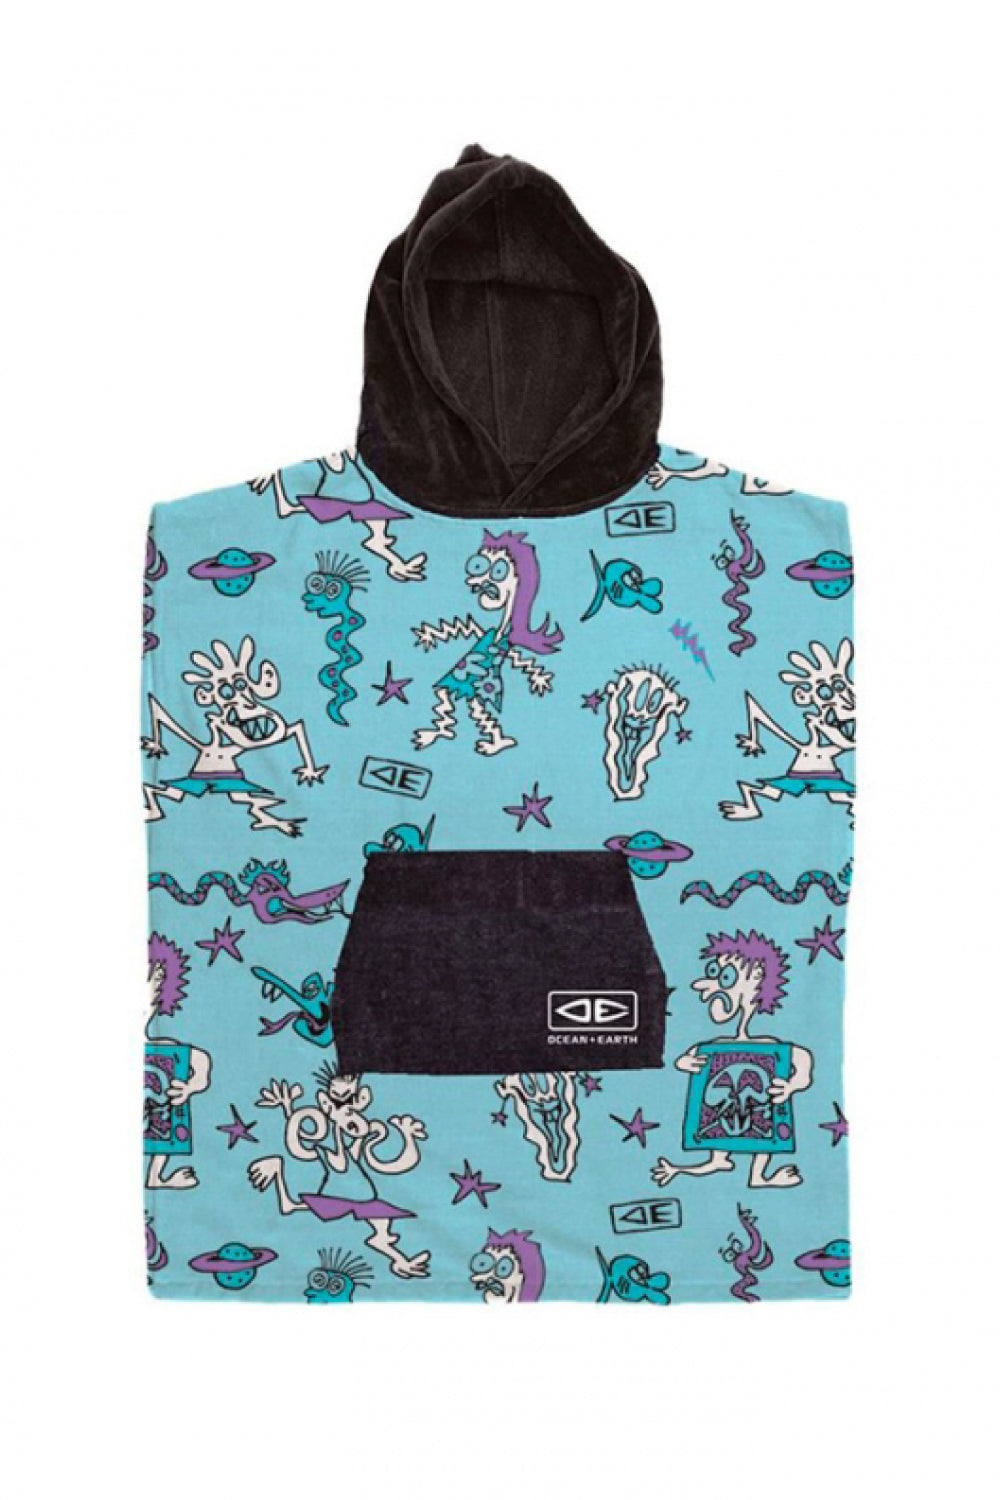 Ocean & Earth Toddlers Irvine Hooded Poncho Towel